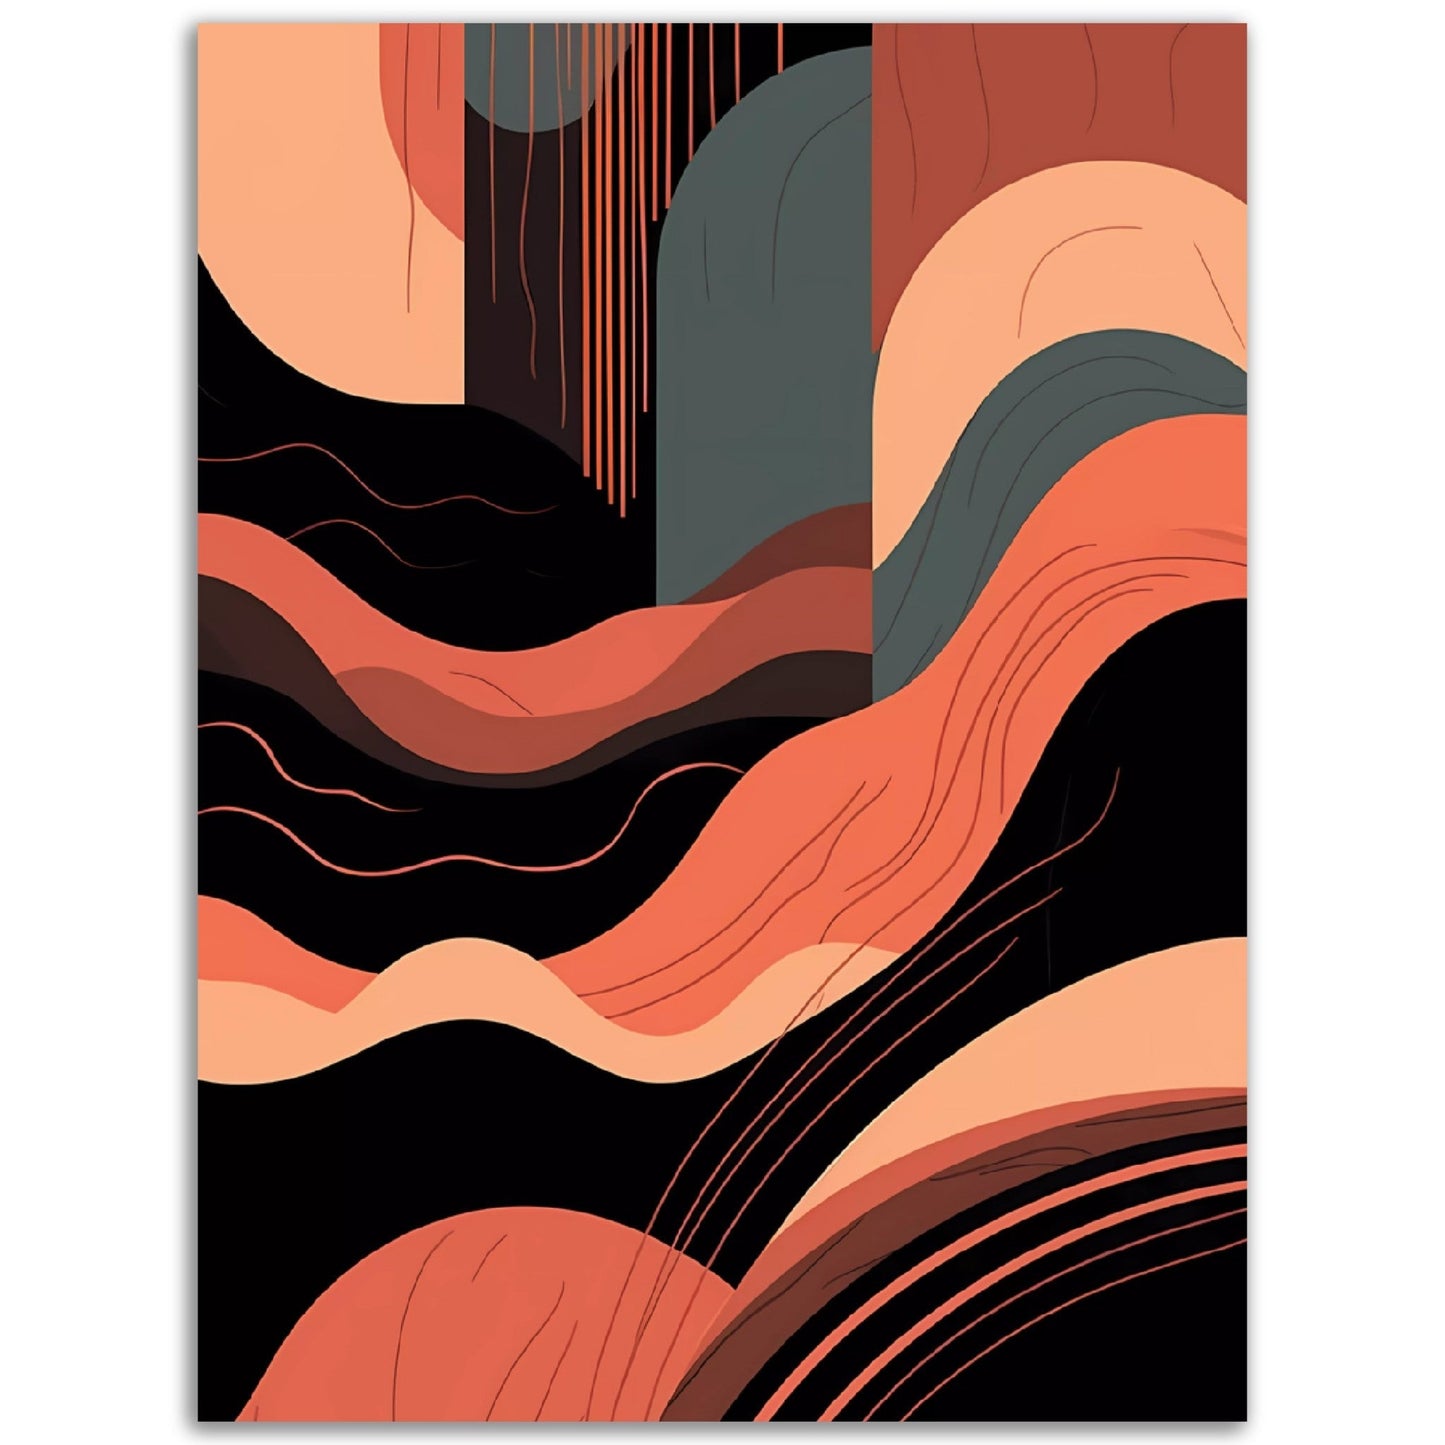 A black and orange Muted Waves art print, perfect as a poster for room decor.